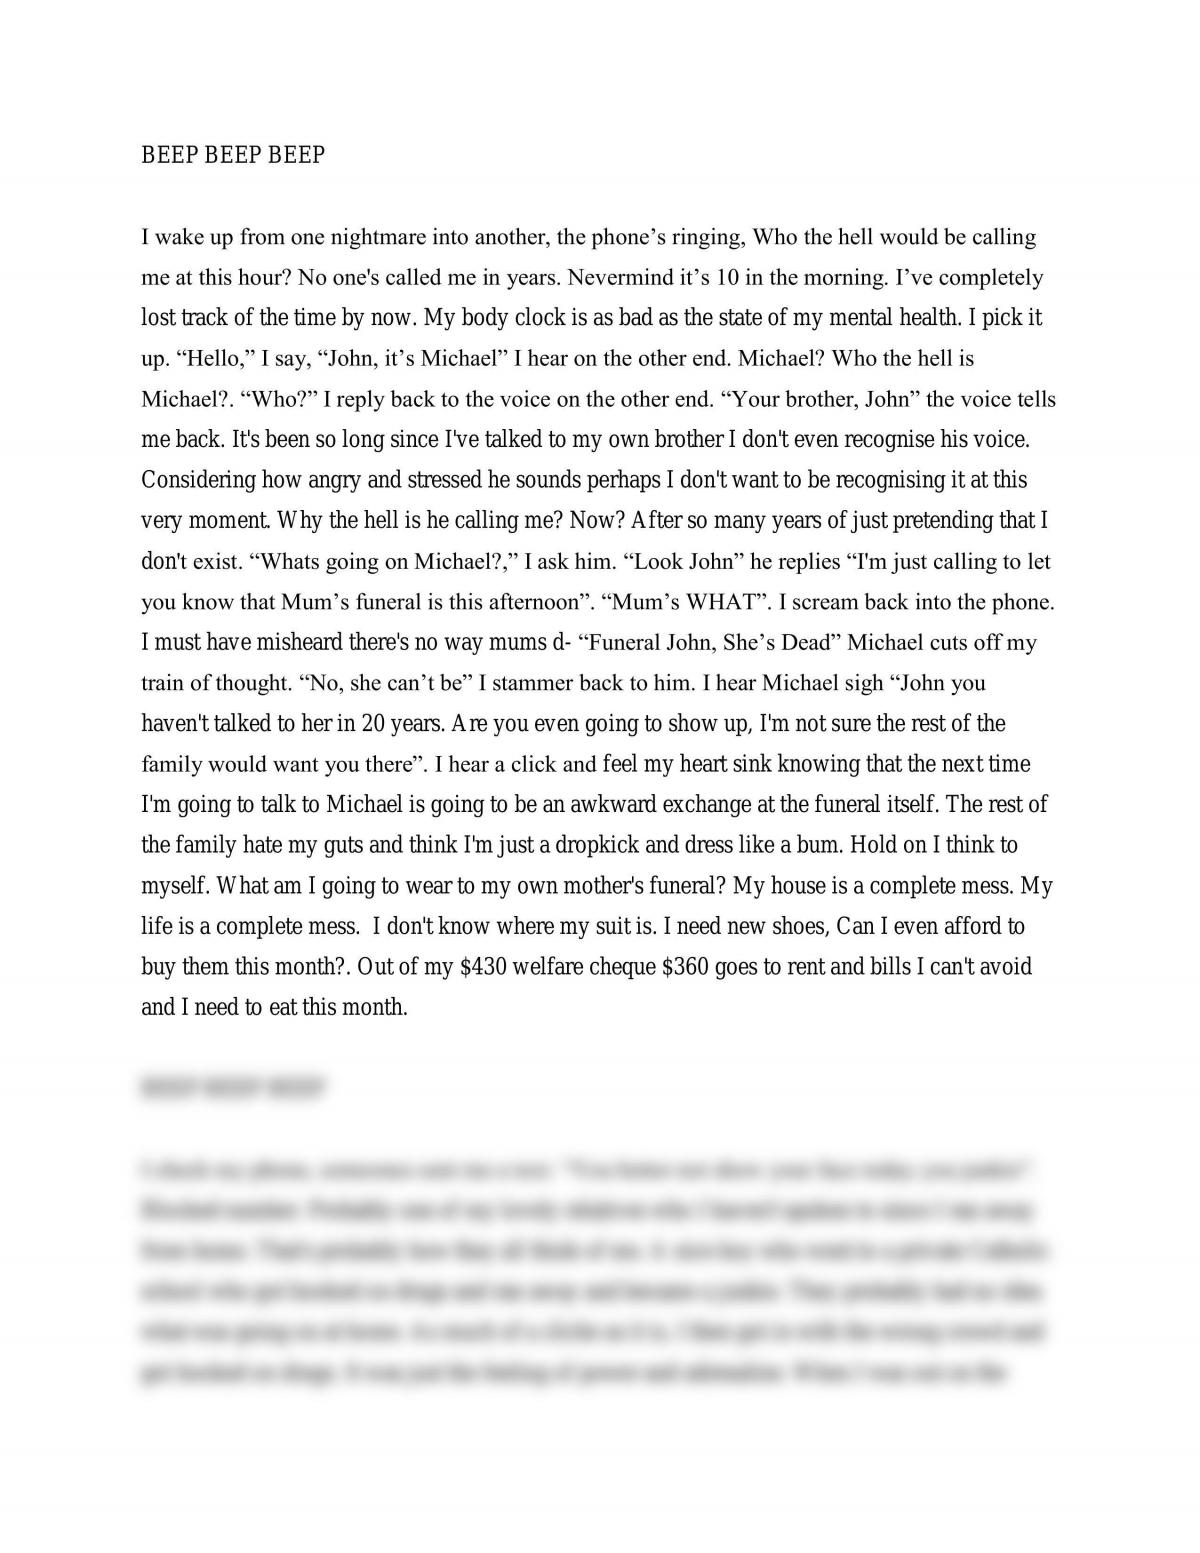 essay story to read